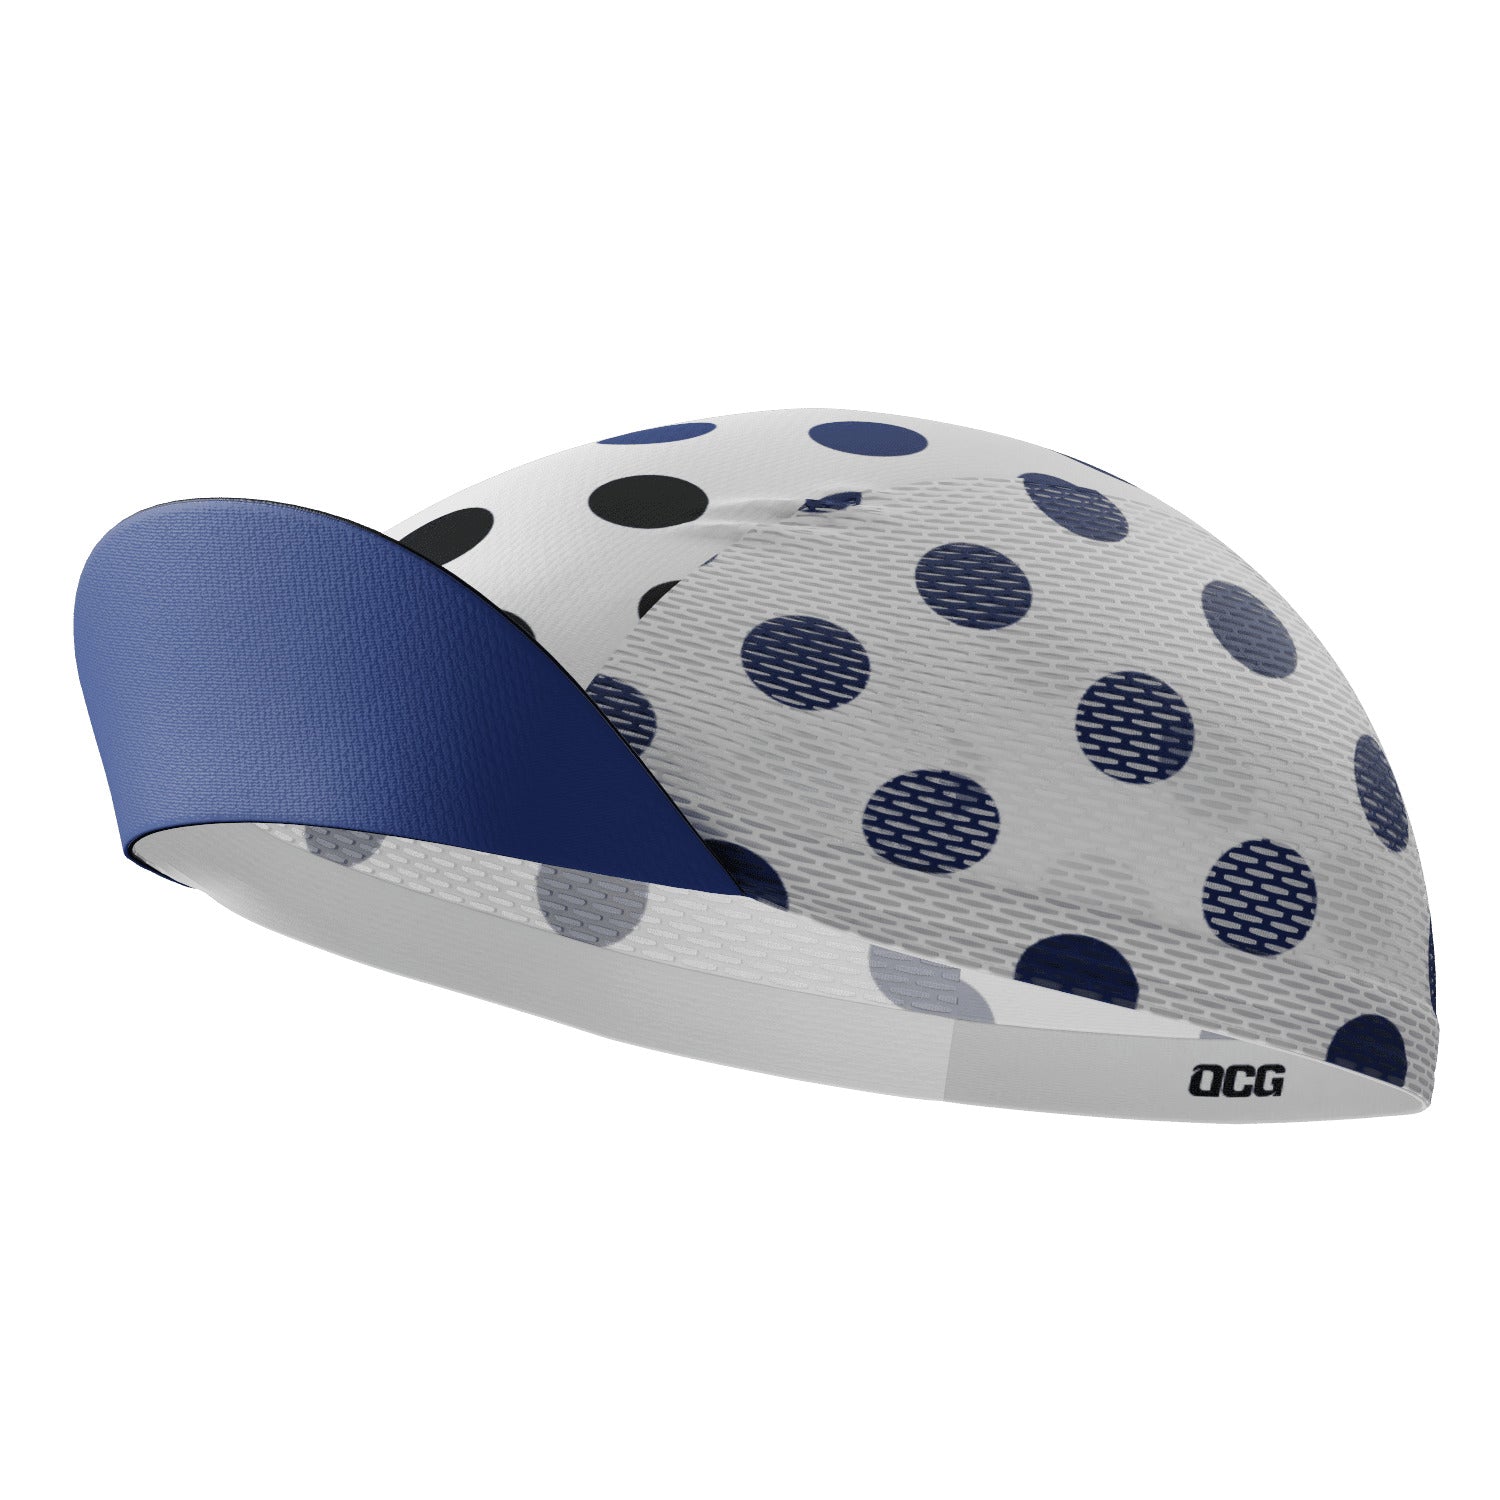 Unisex Red Polka Dots on White Quick Dry Cycling Cap